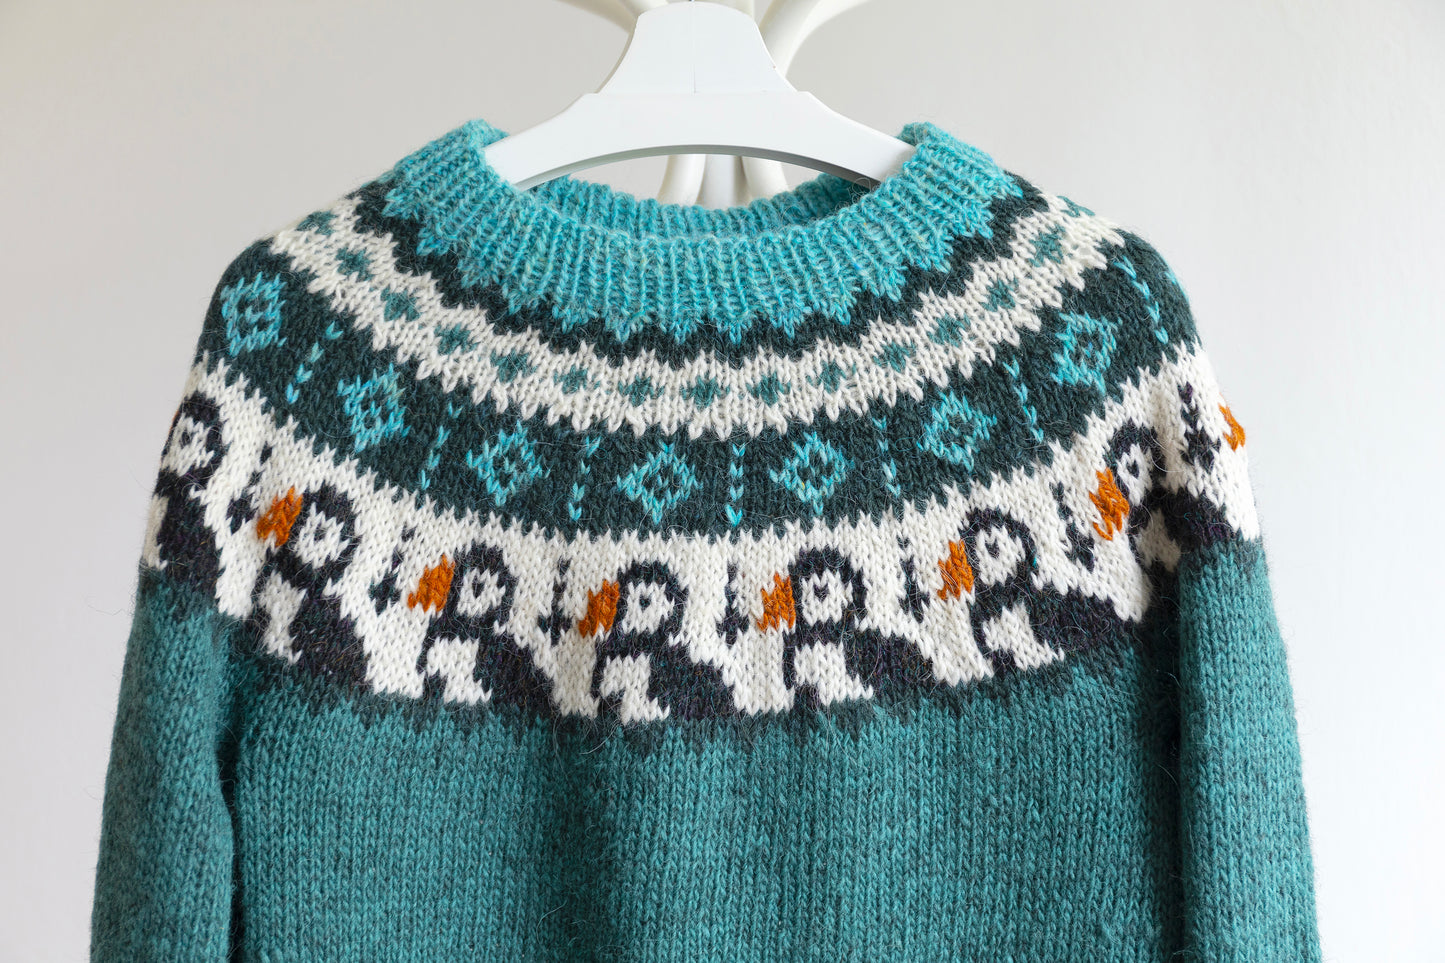 Close up for Turquoise, white and black pure Icelandic wool hand-knitted lopapeysa sweater in Puffins knitting pattern